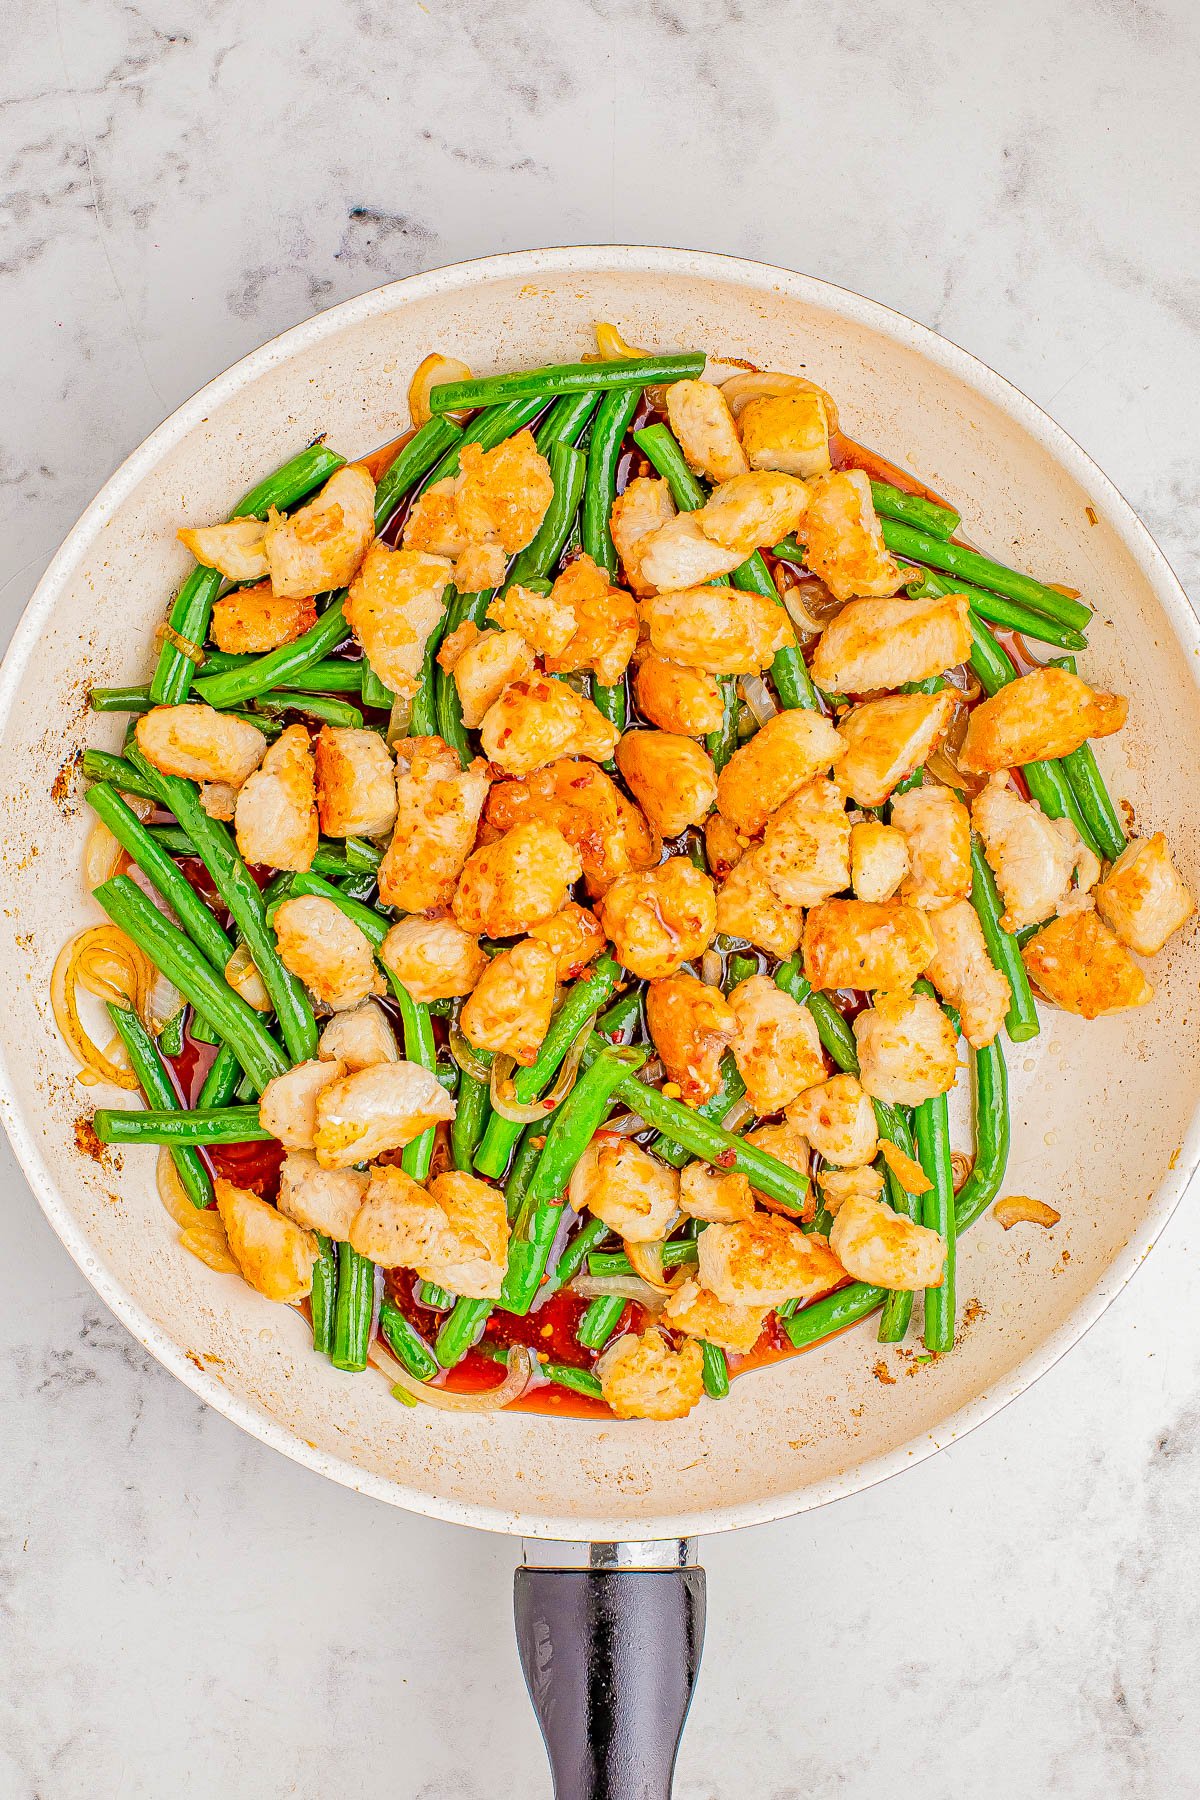 A stir-fried dish with chicken, green beans, and red peppers in a skillet, on a marble countertop.